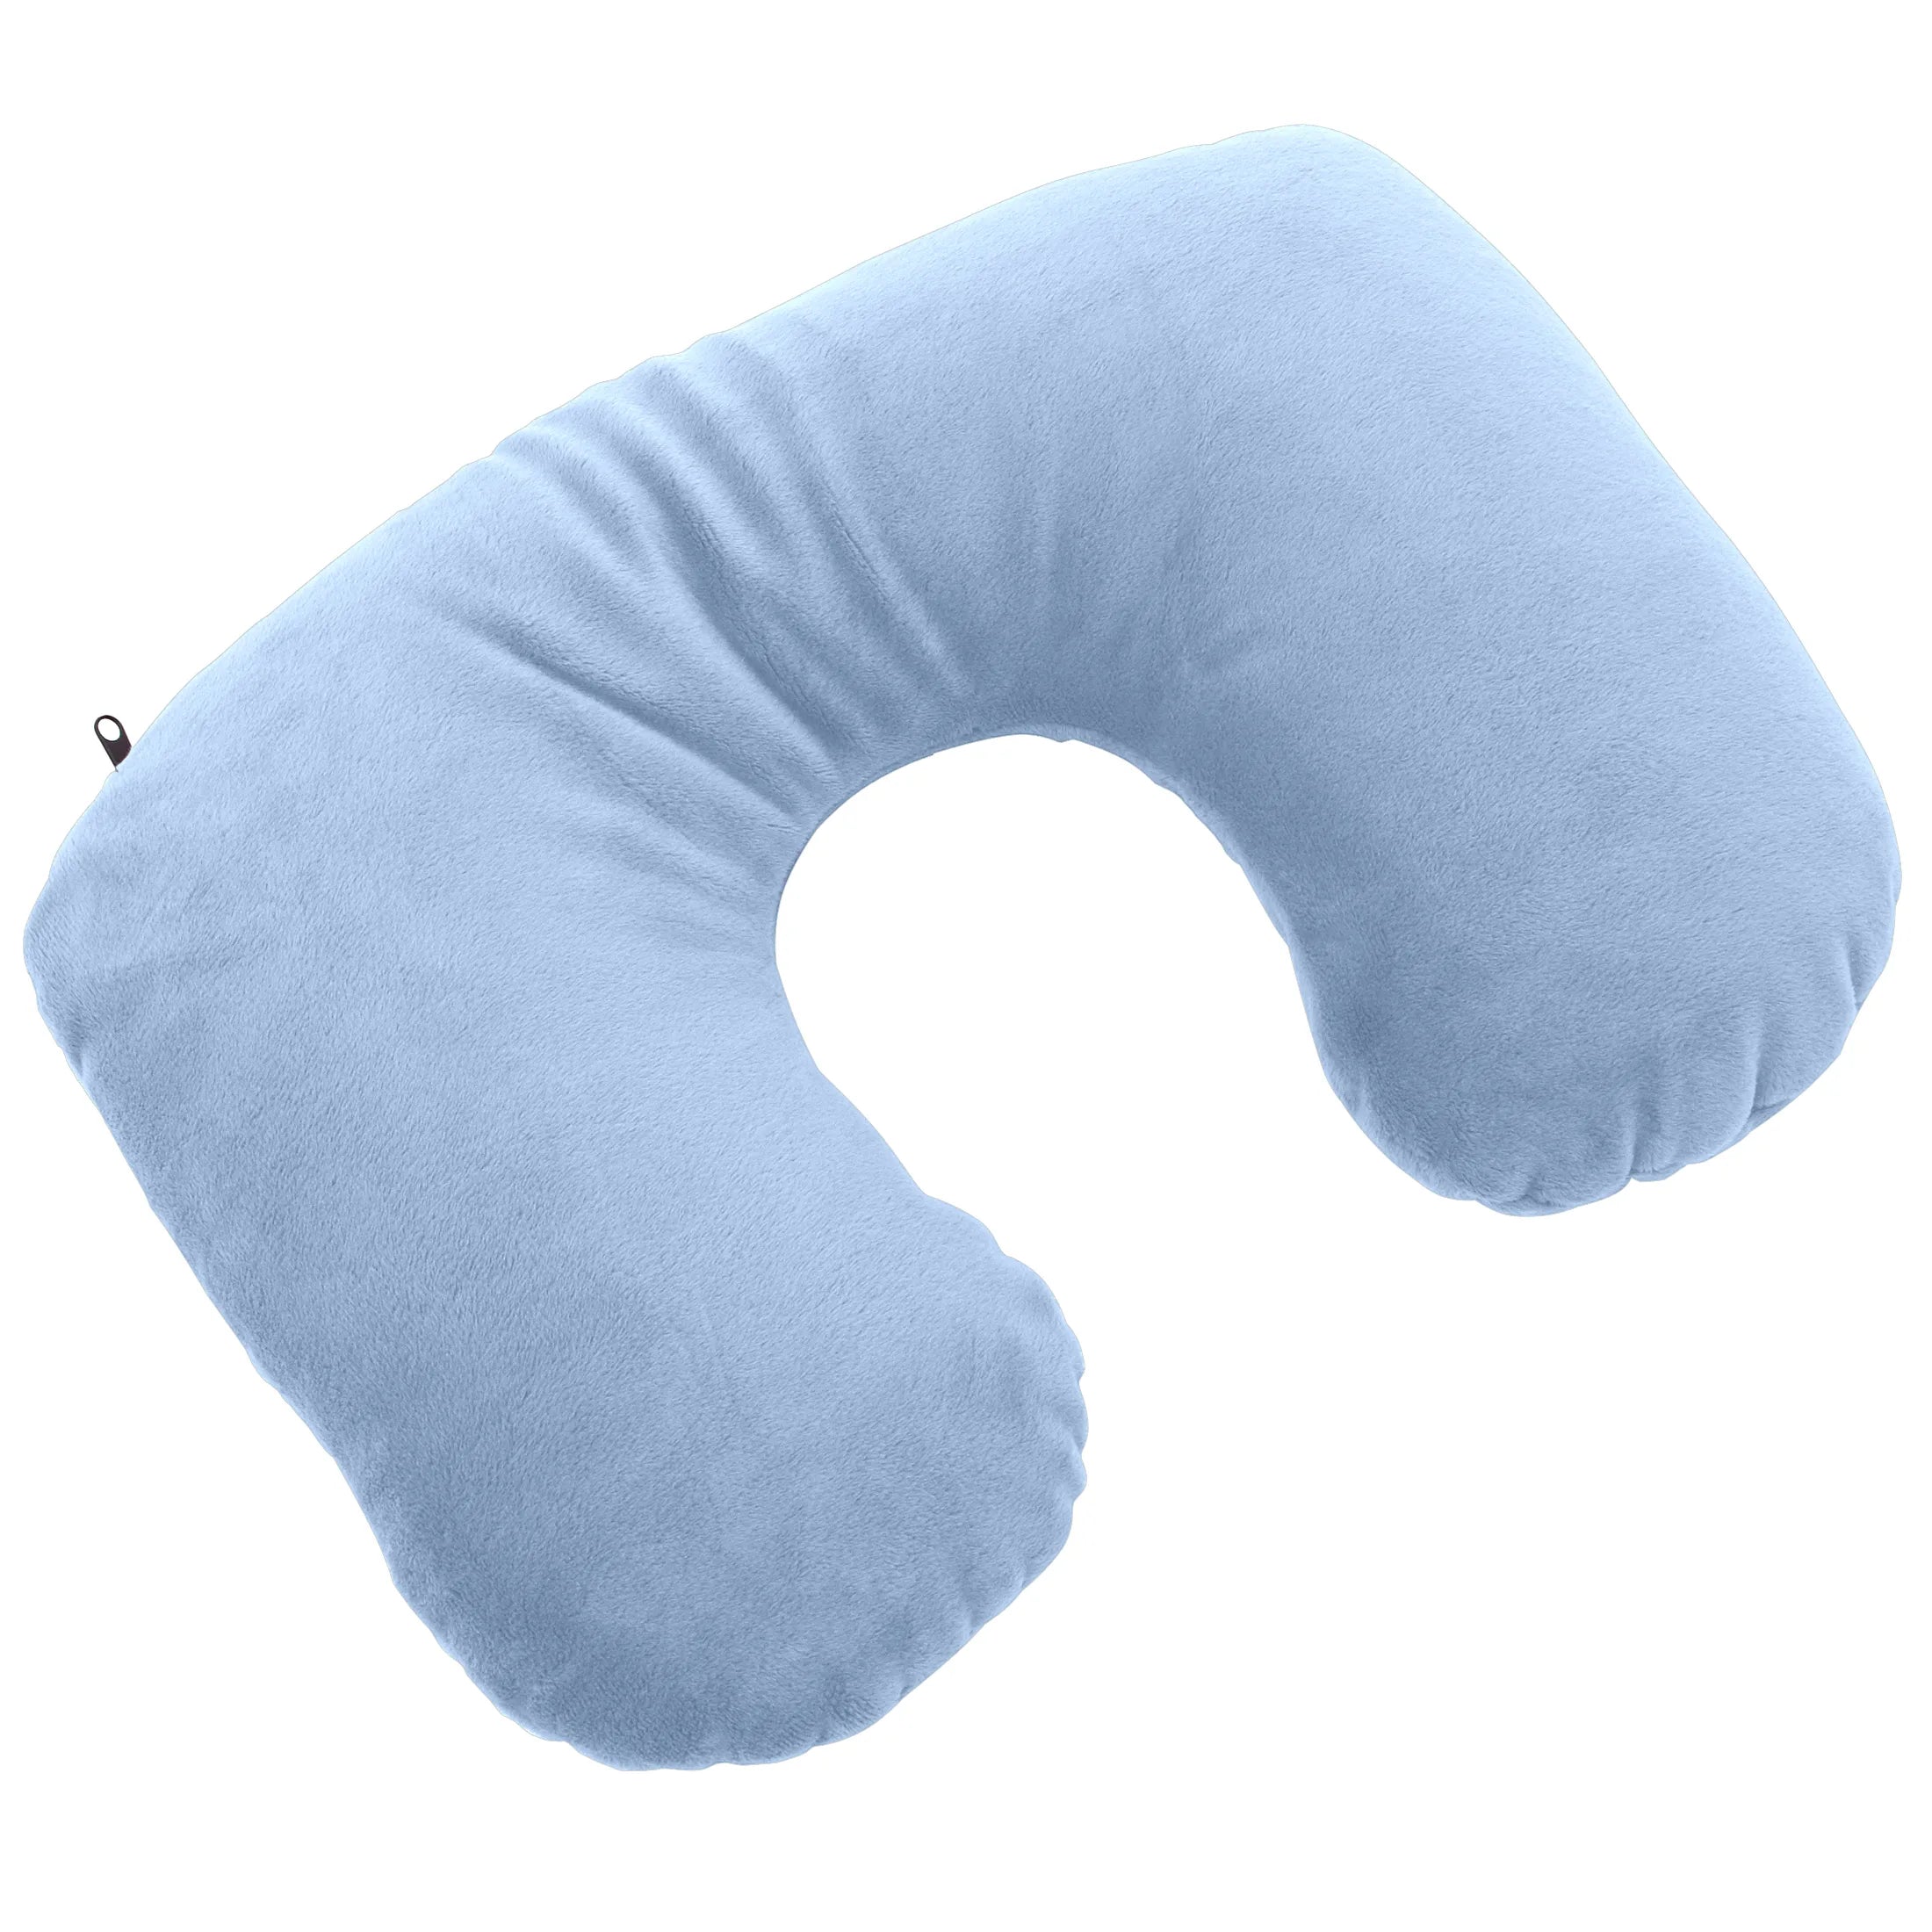 Design Go travel accessories convertible neck cushion in pillow - light blue